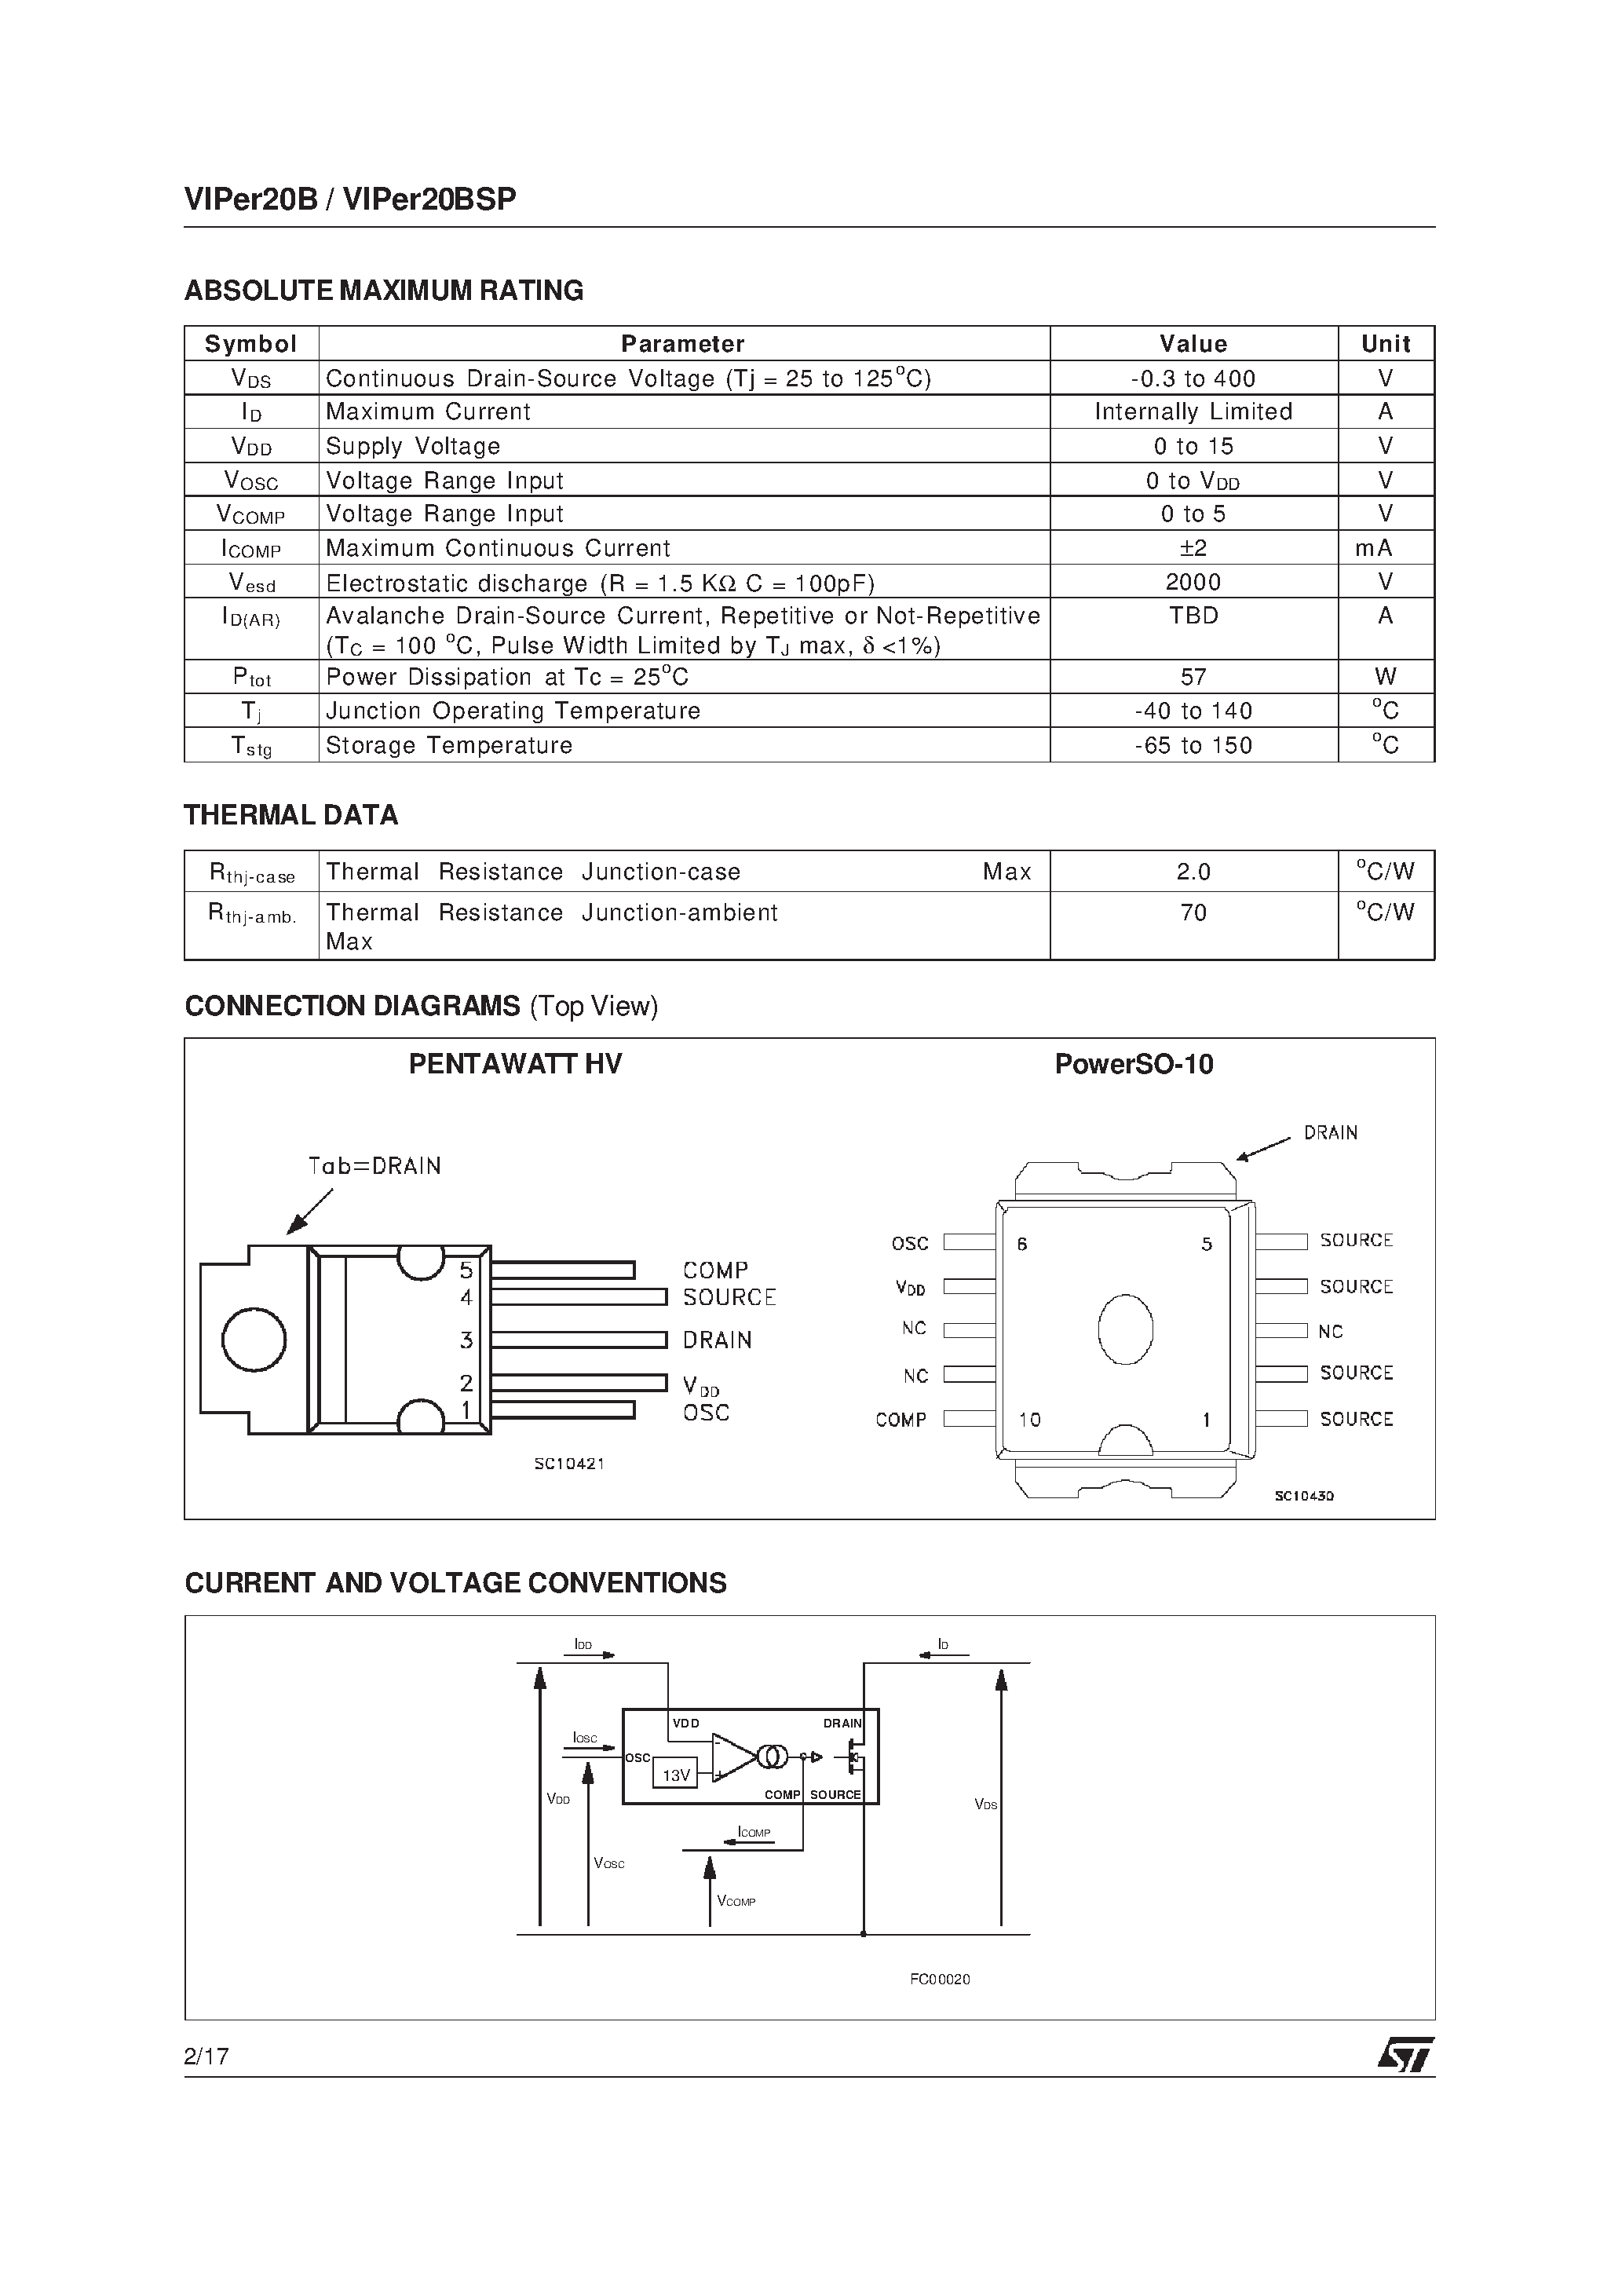 Datasheet VIPER20B - SMPS PRIMARY I.C. page 2